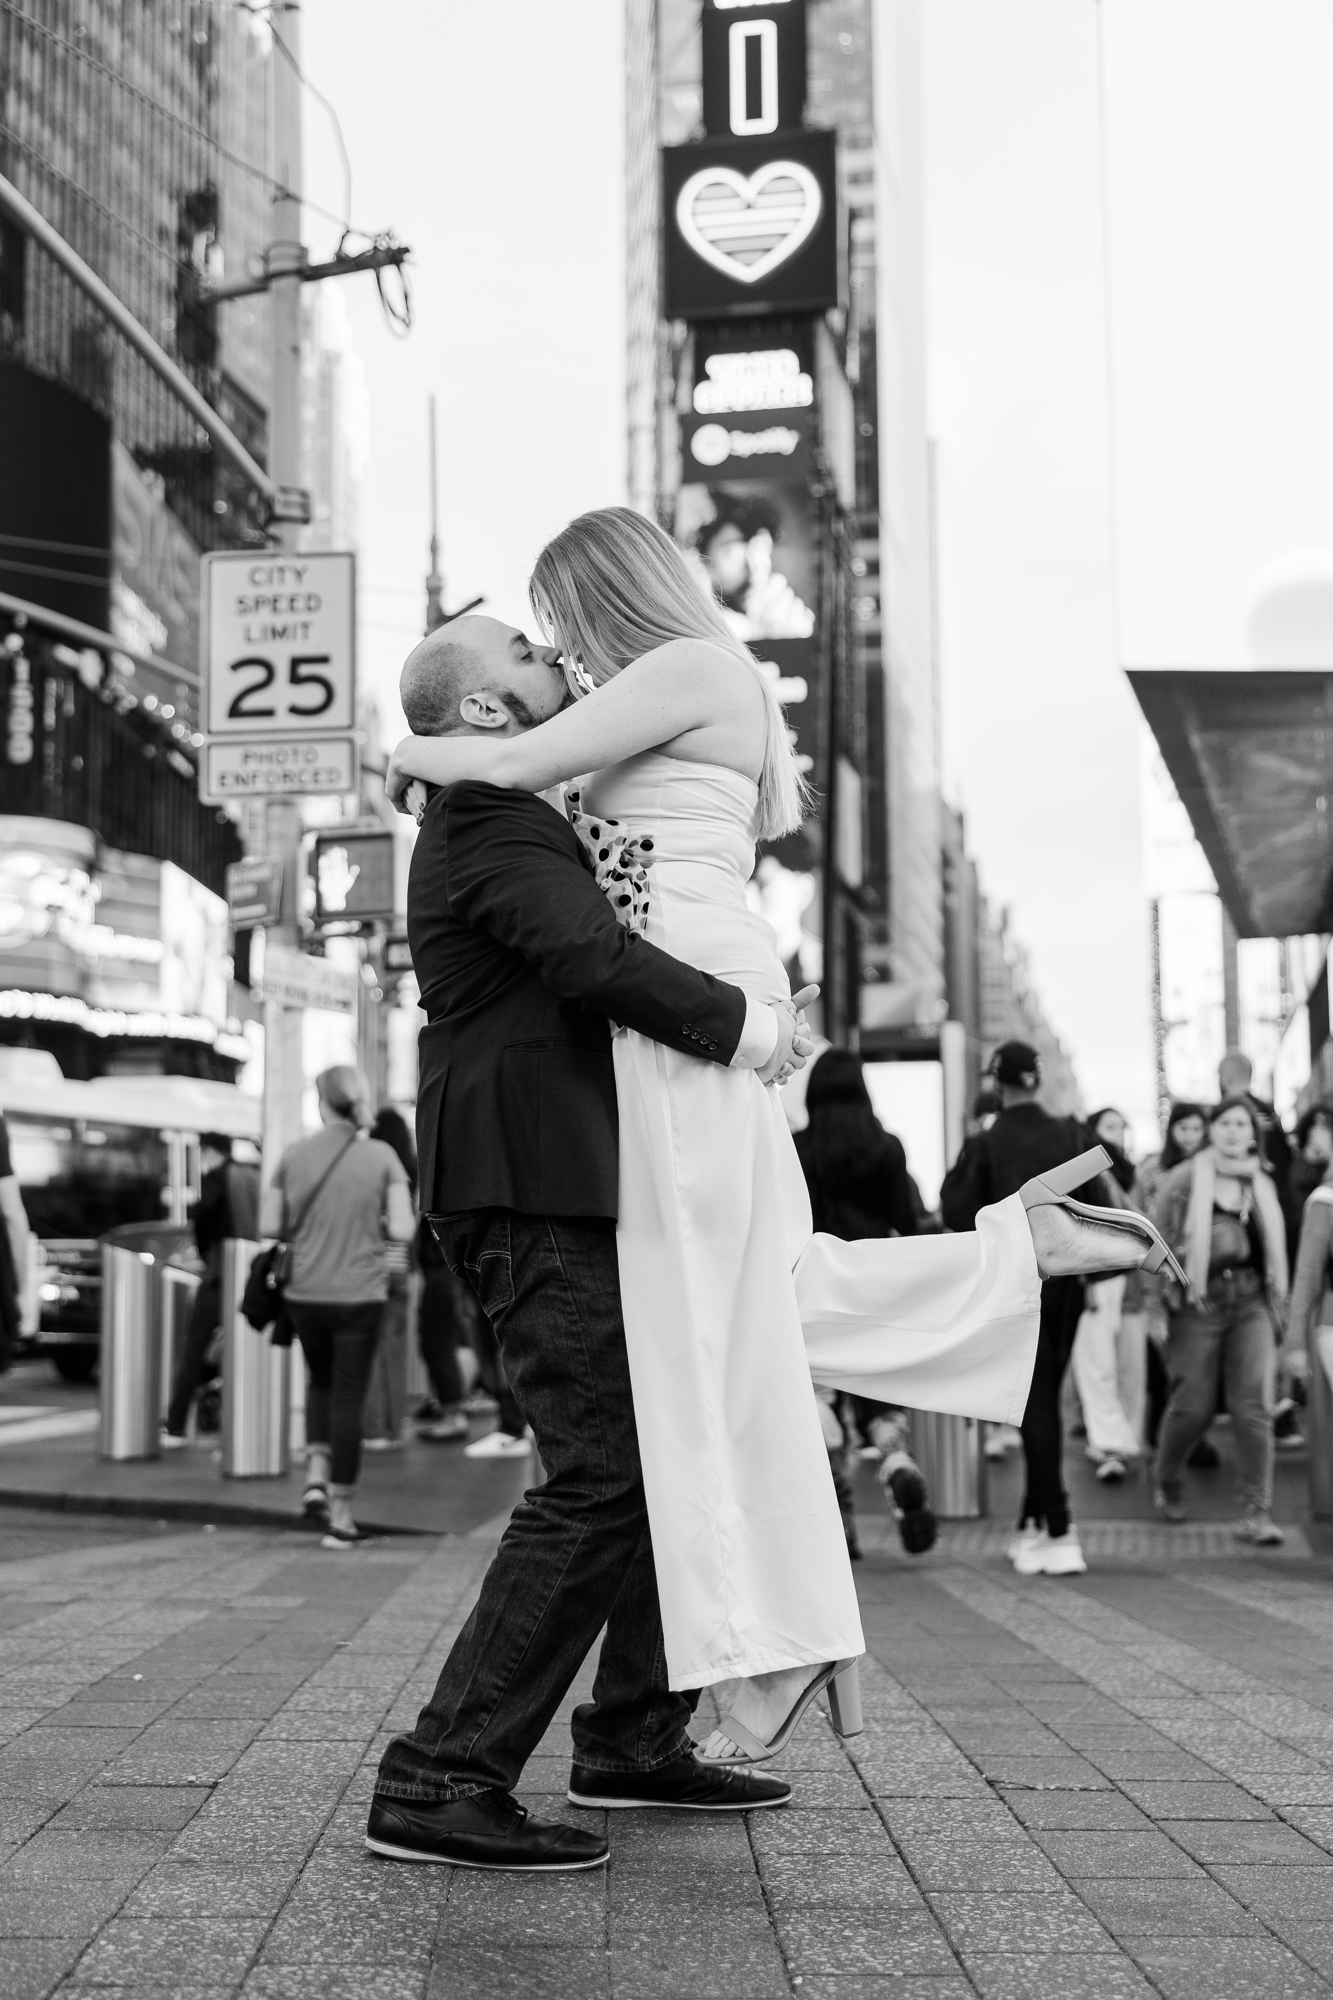 Special Times Square Engagement Session